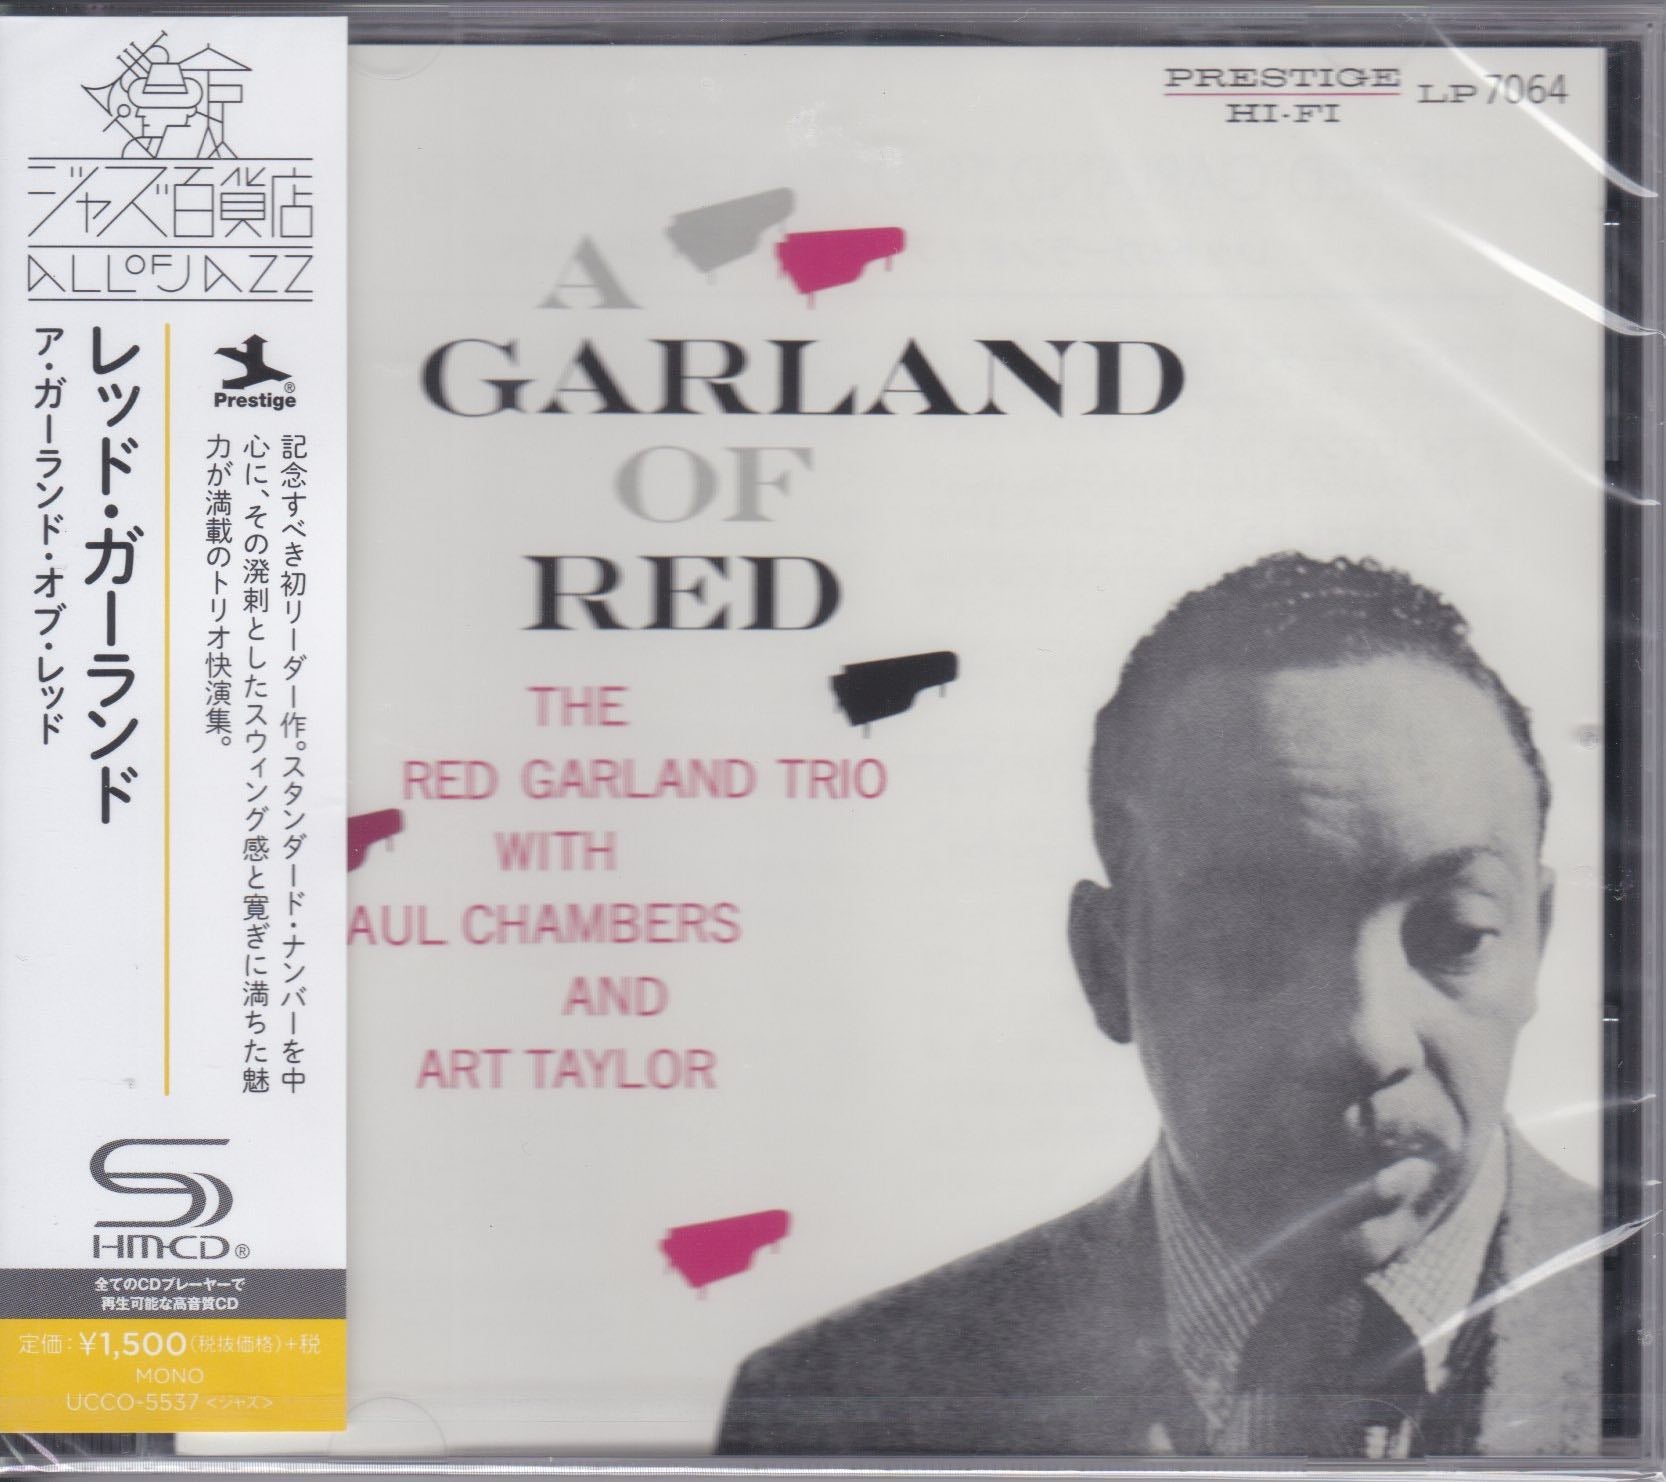 The Red Garland Trio With Paul Chambers And Art Taylor ‎– A Garland Of Red